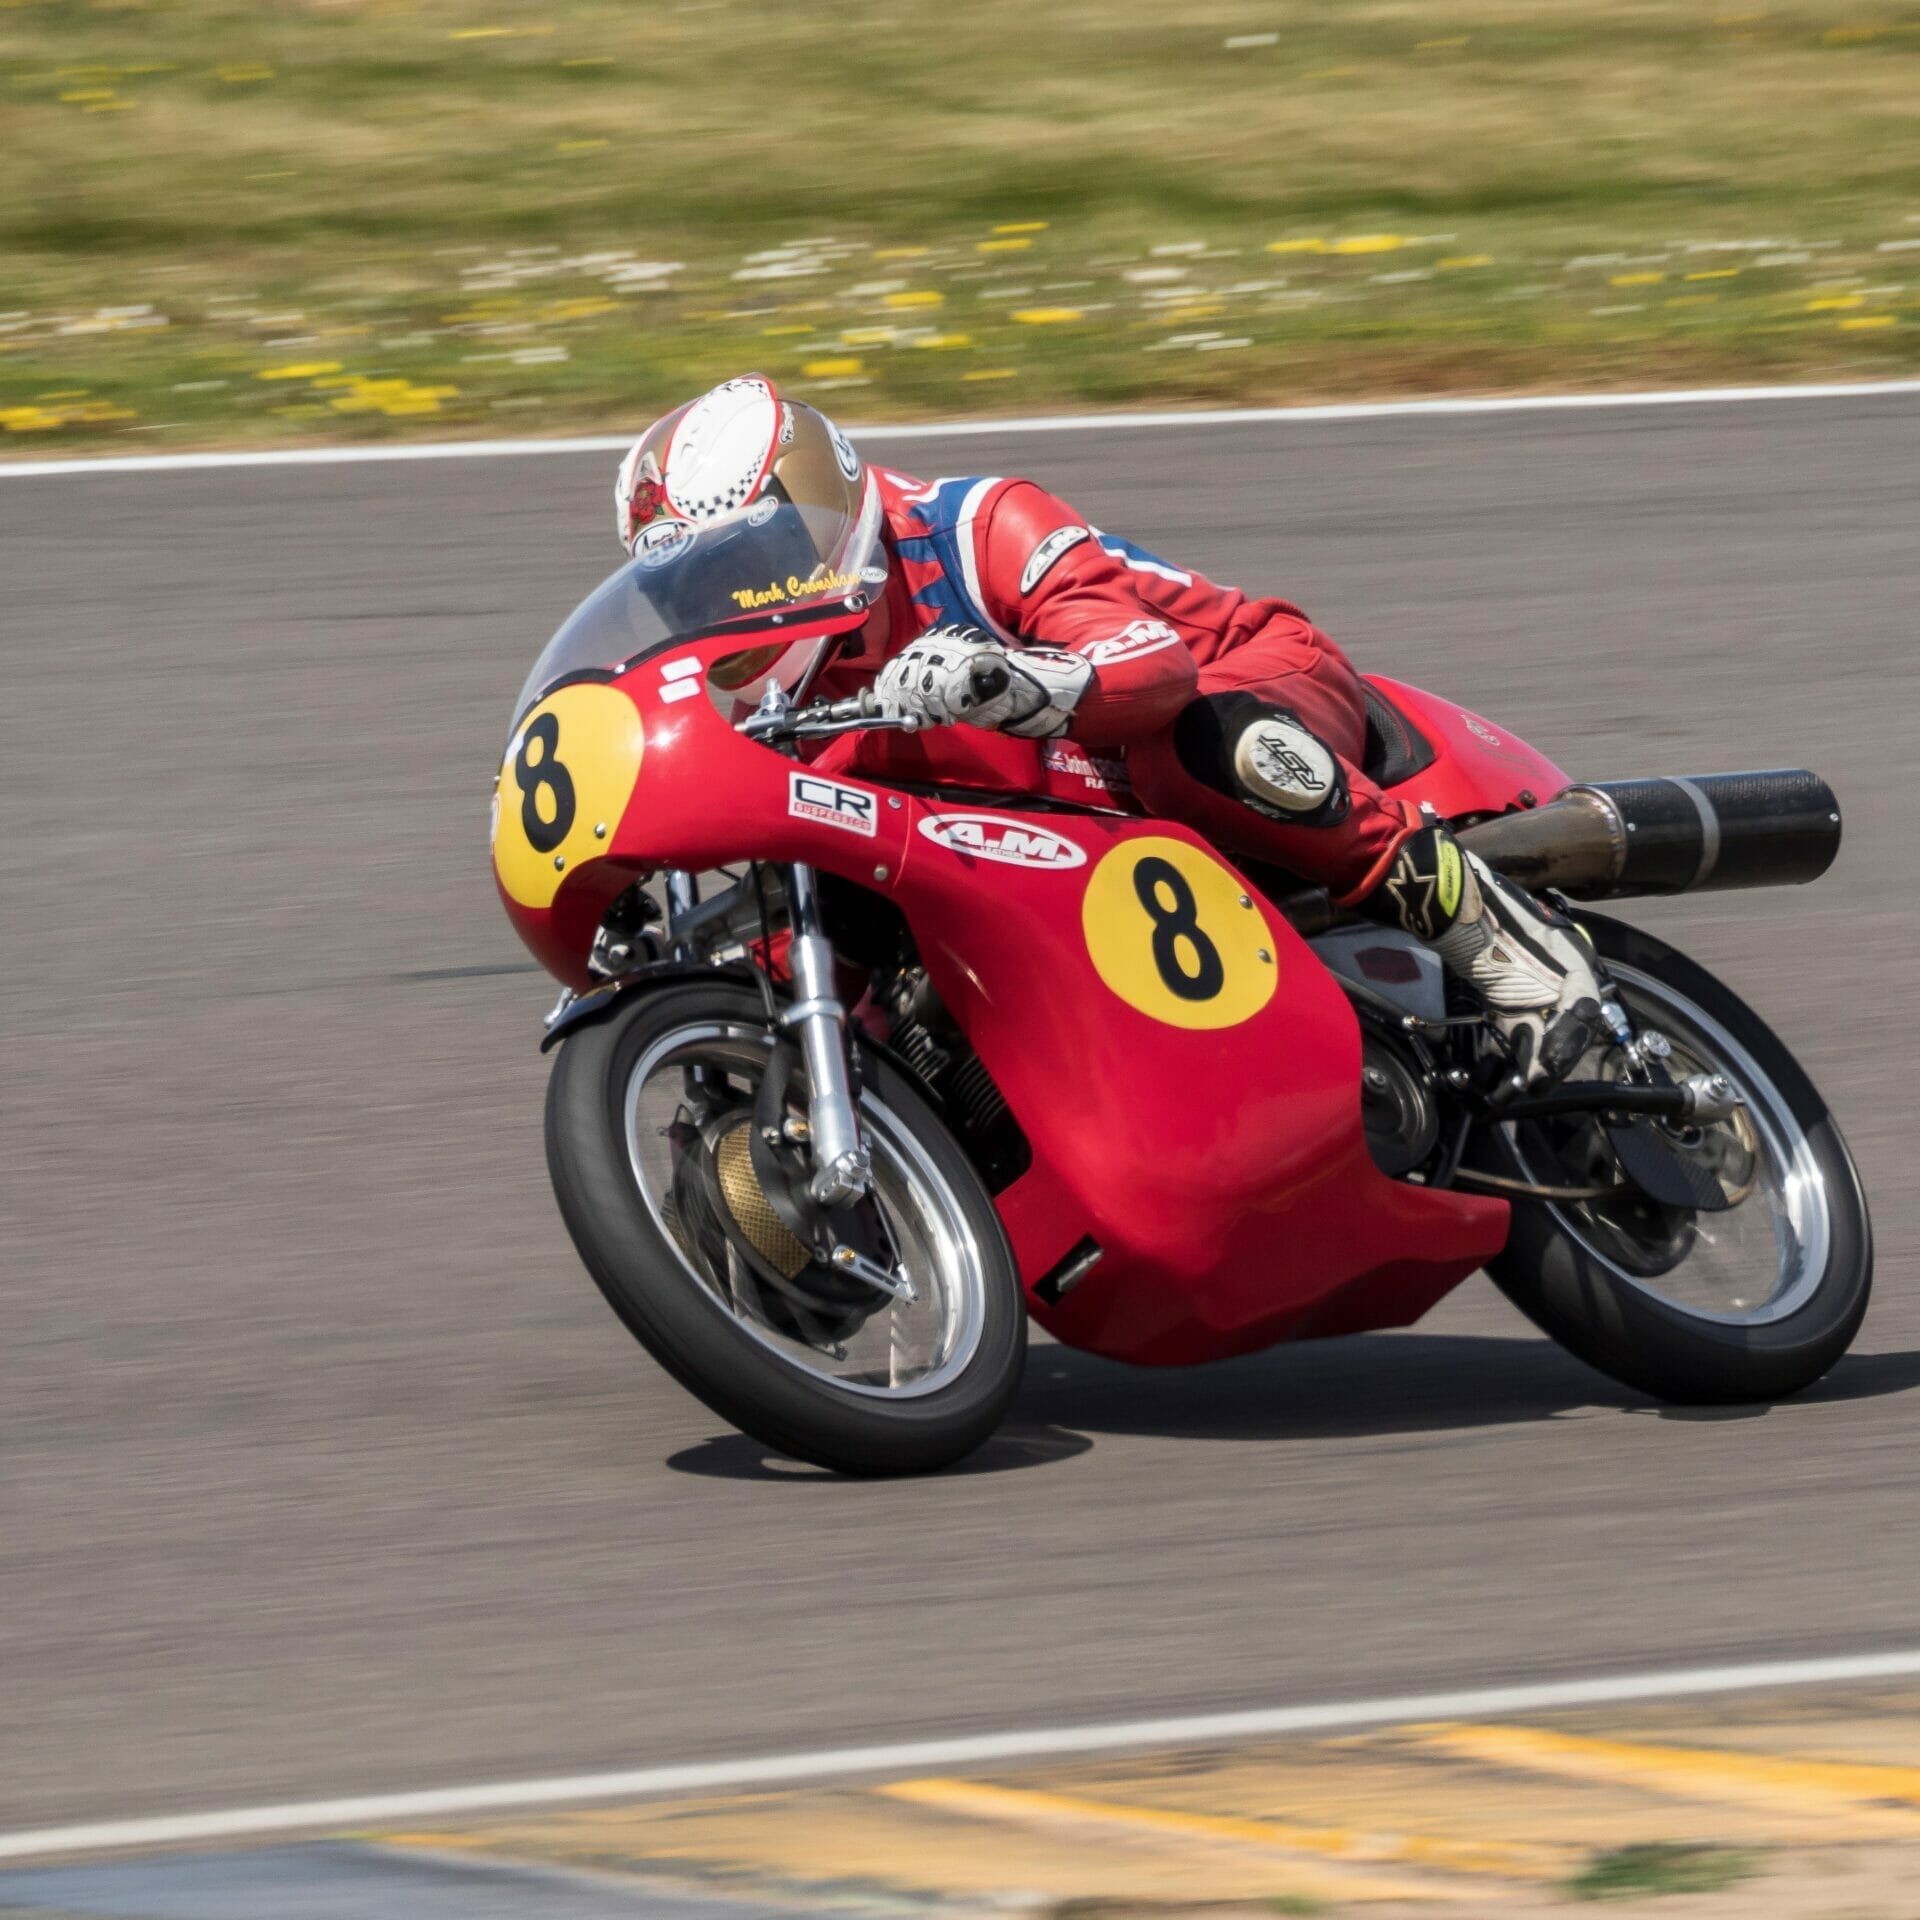 Photo of a rider on a motorbike racing around a track - Action Photography - Classic Bike Racing at Ty Croes Racetrack - WelshotRewards Day